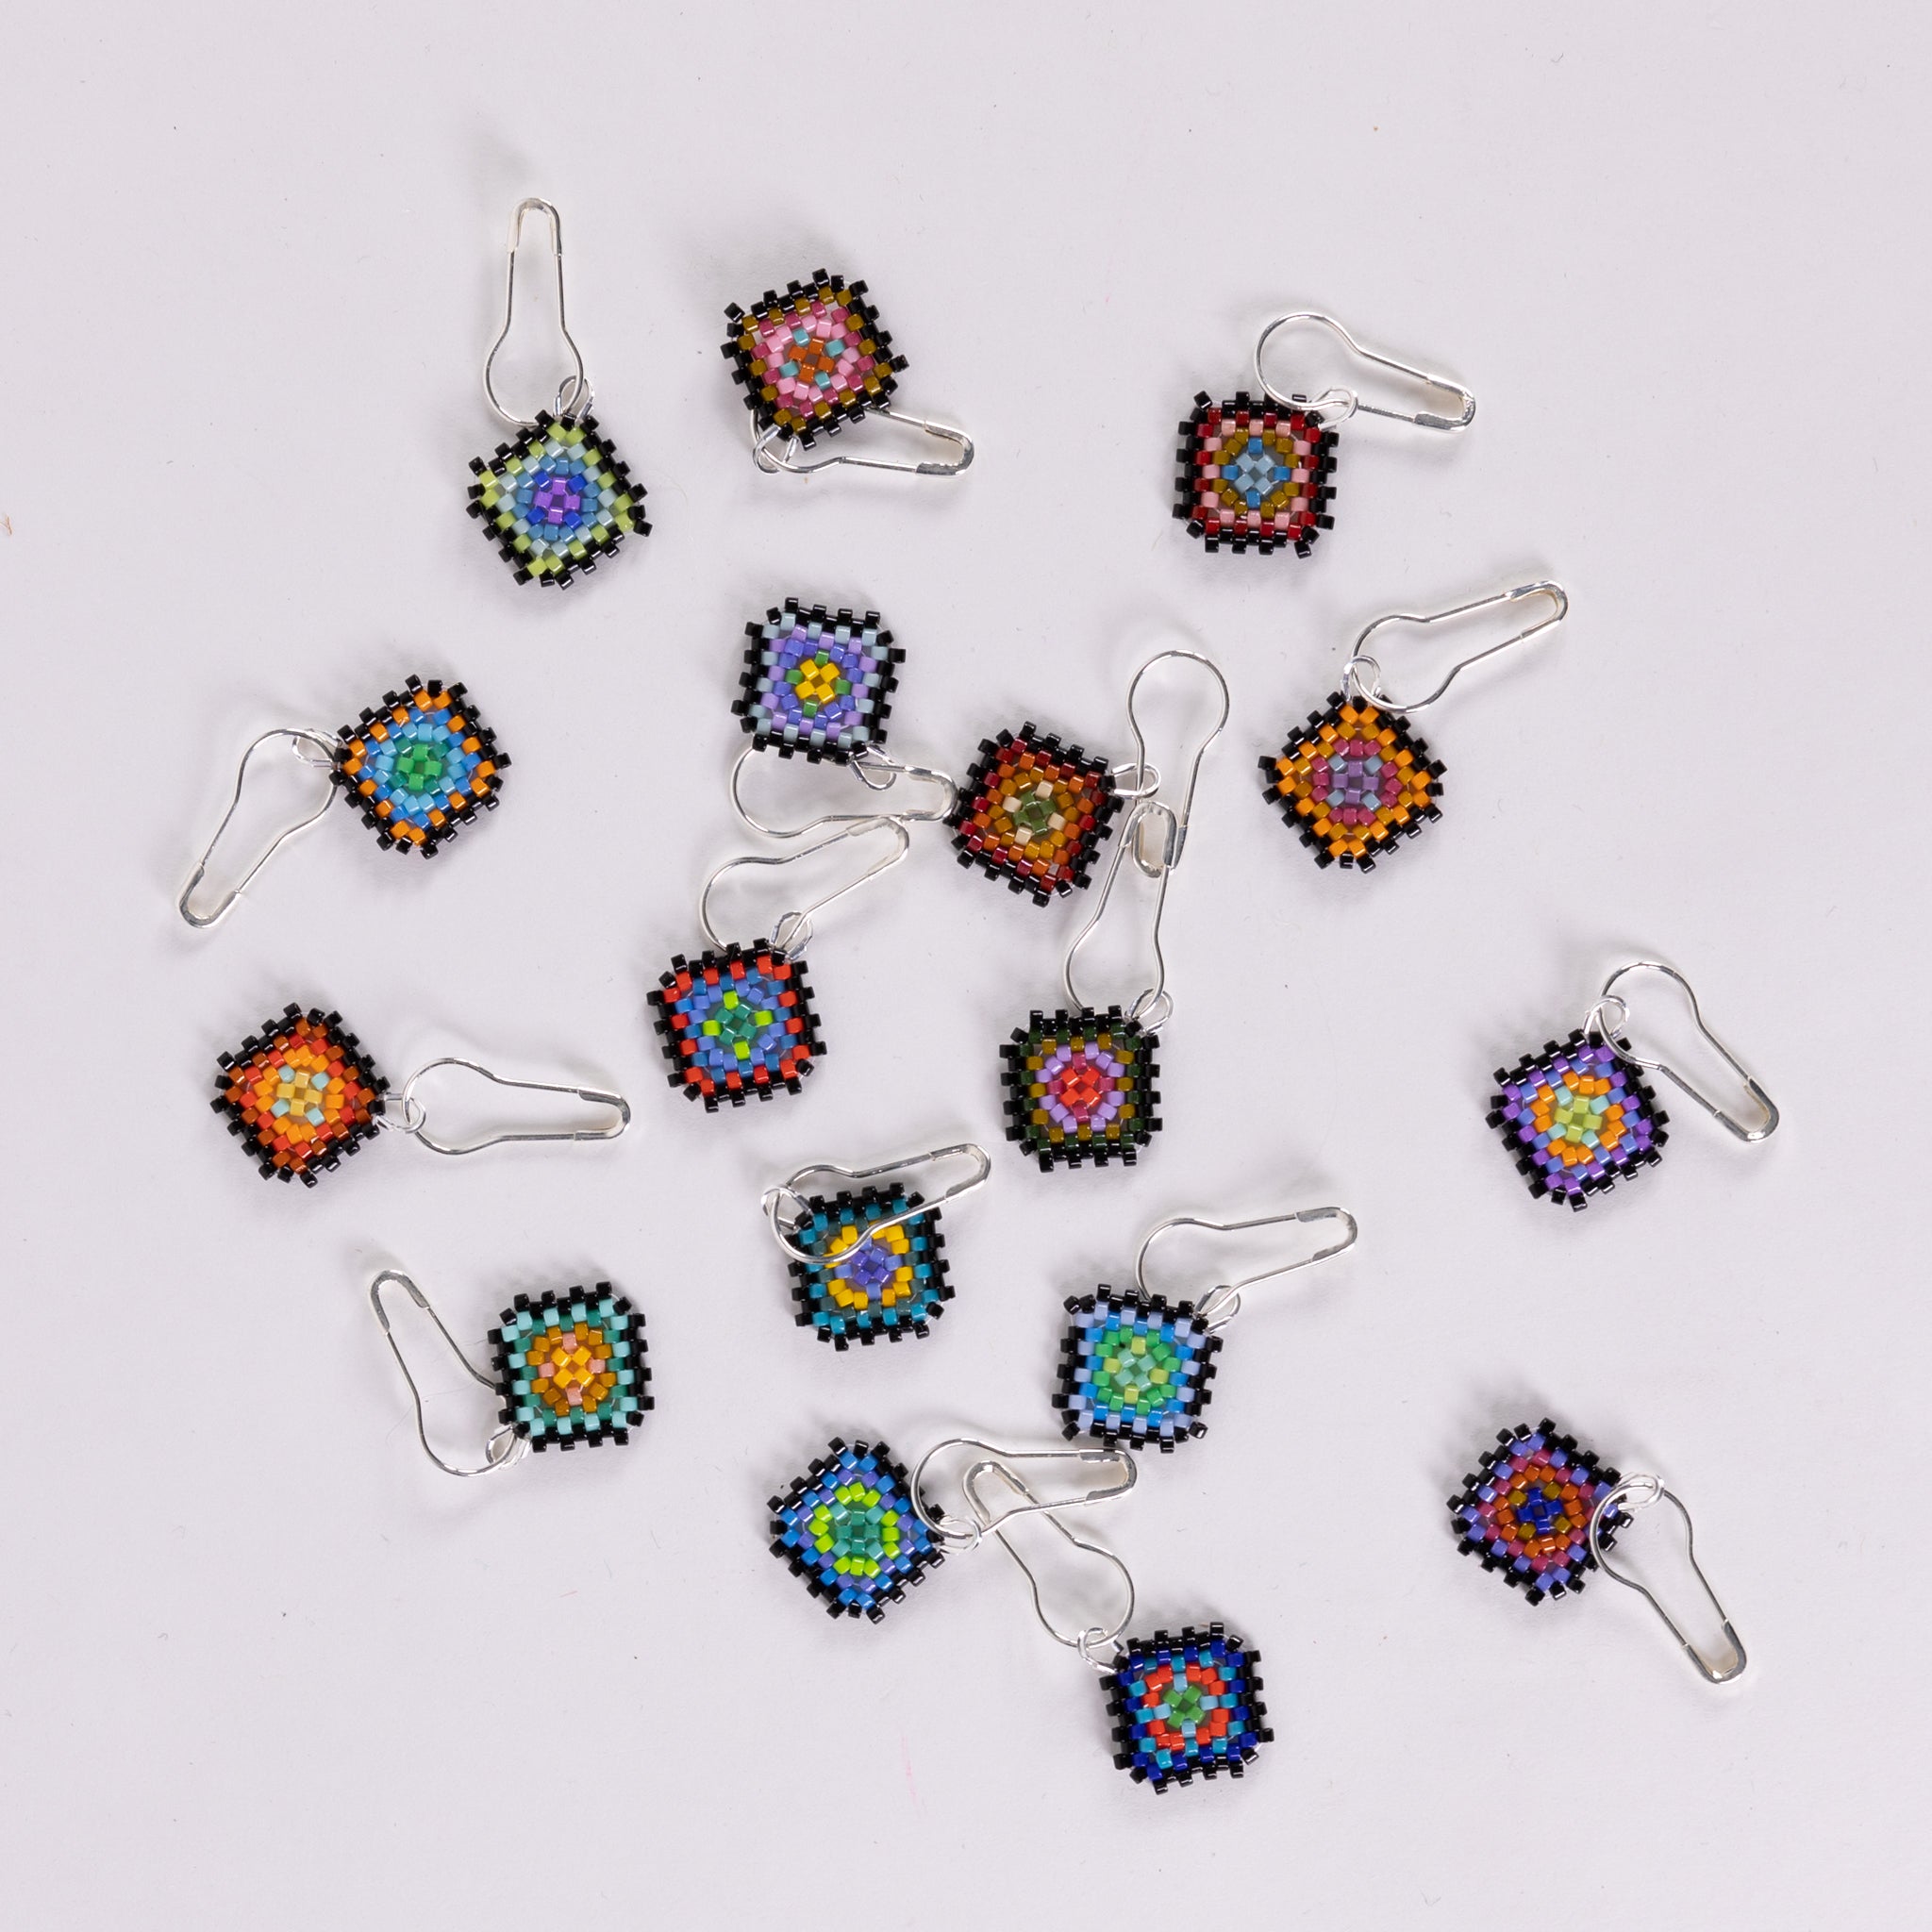 Precious Metal Stitch Markers from CocoKnits